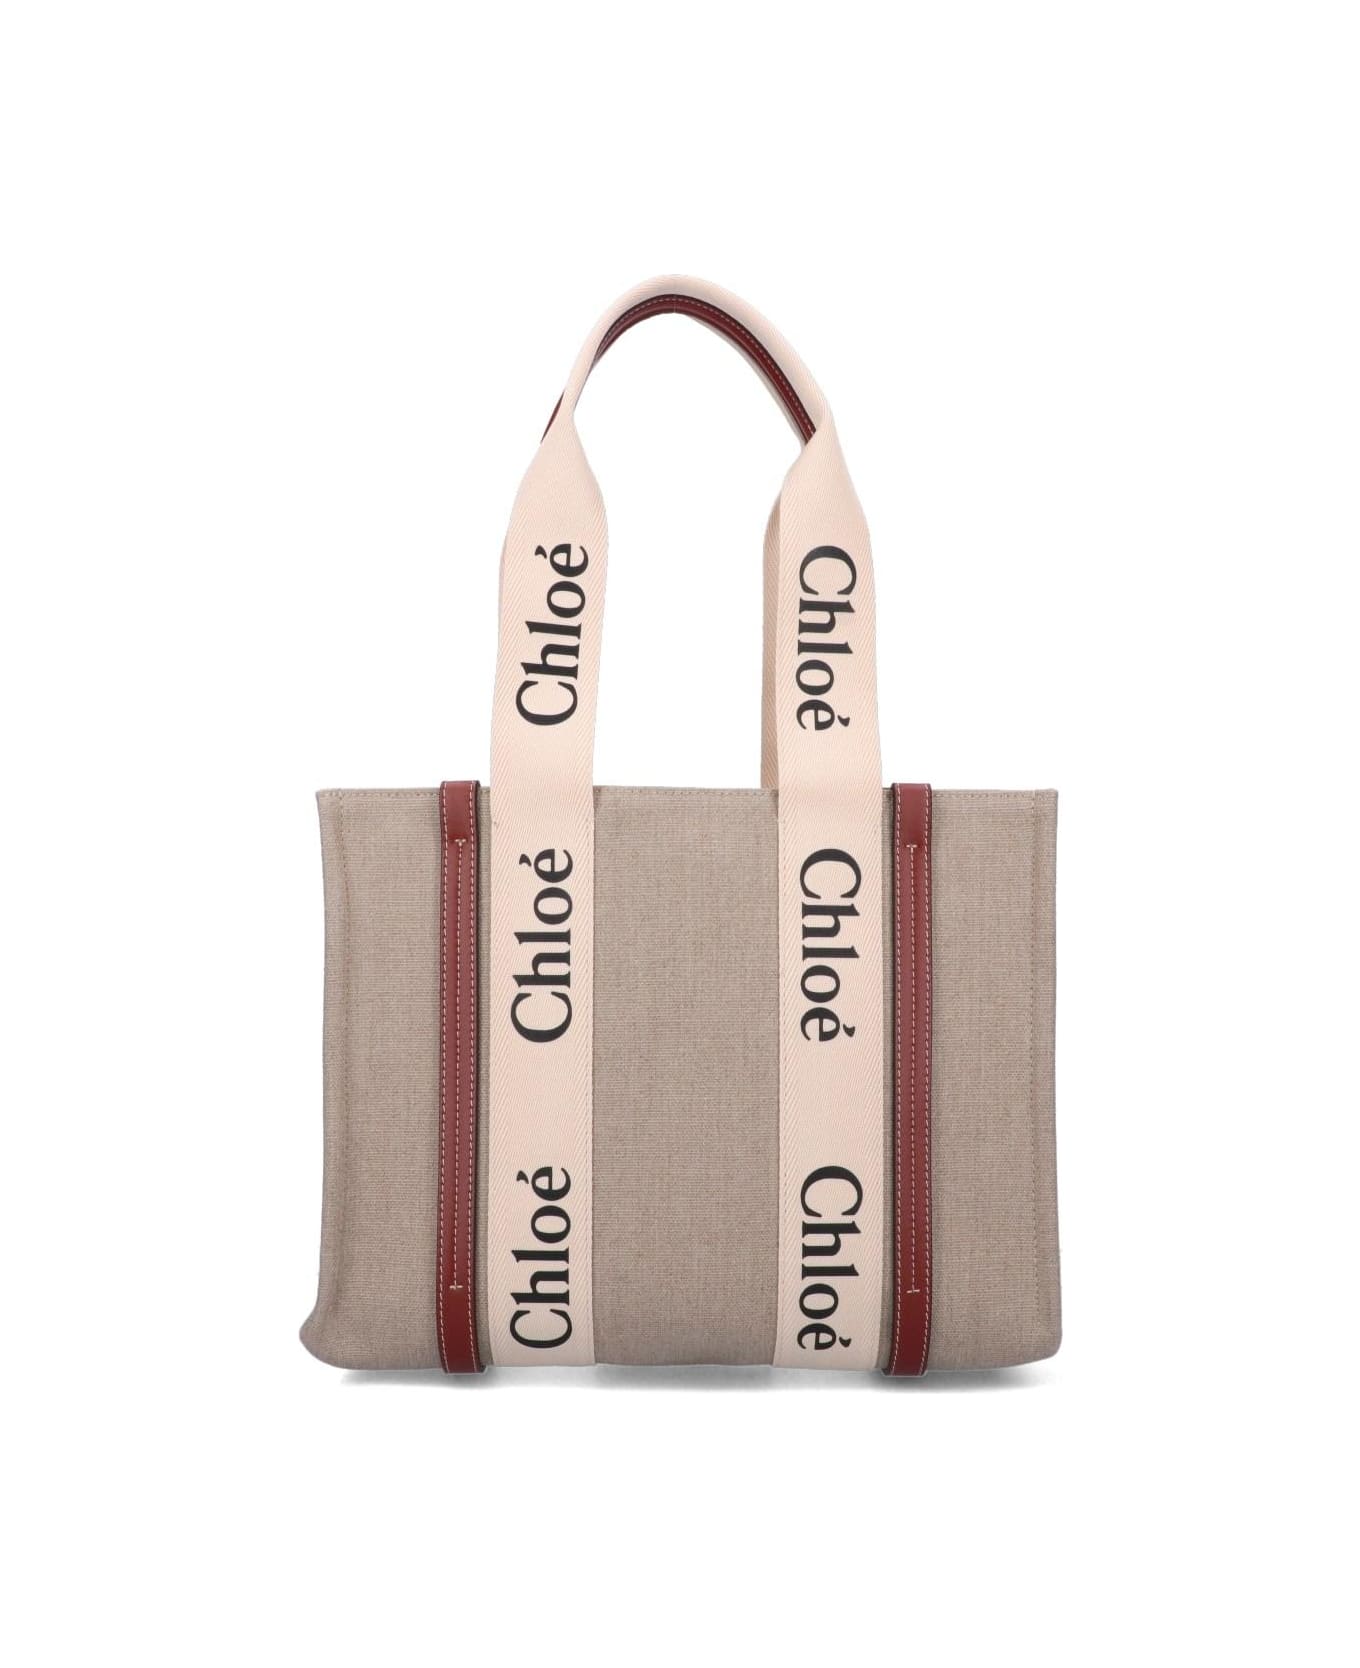 Chloé White And Brown Medium Woody Shopping Bag With Shoulder Strap - Marrone トートバッグ